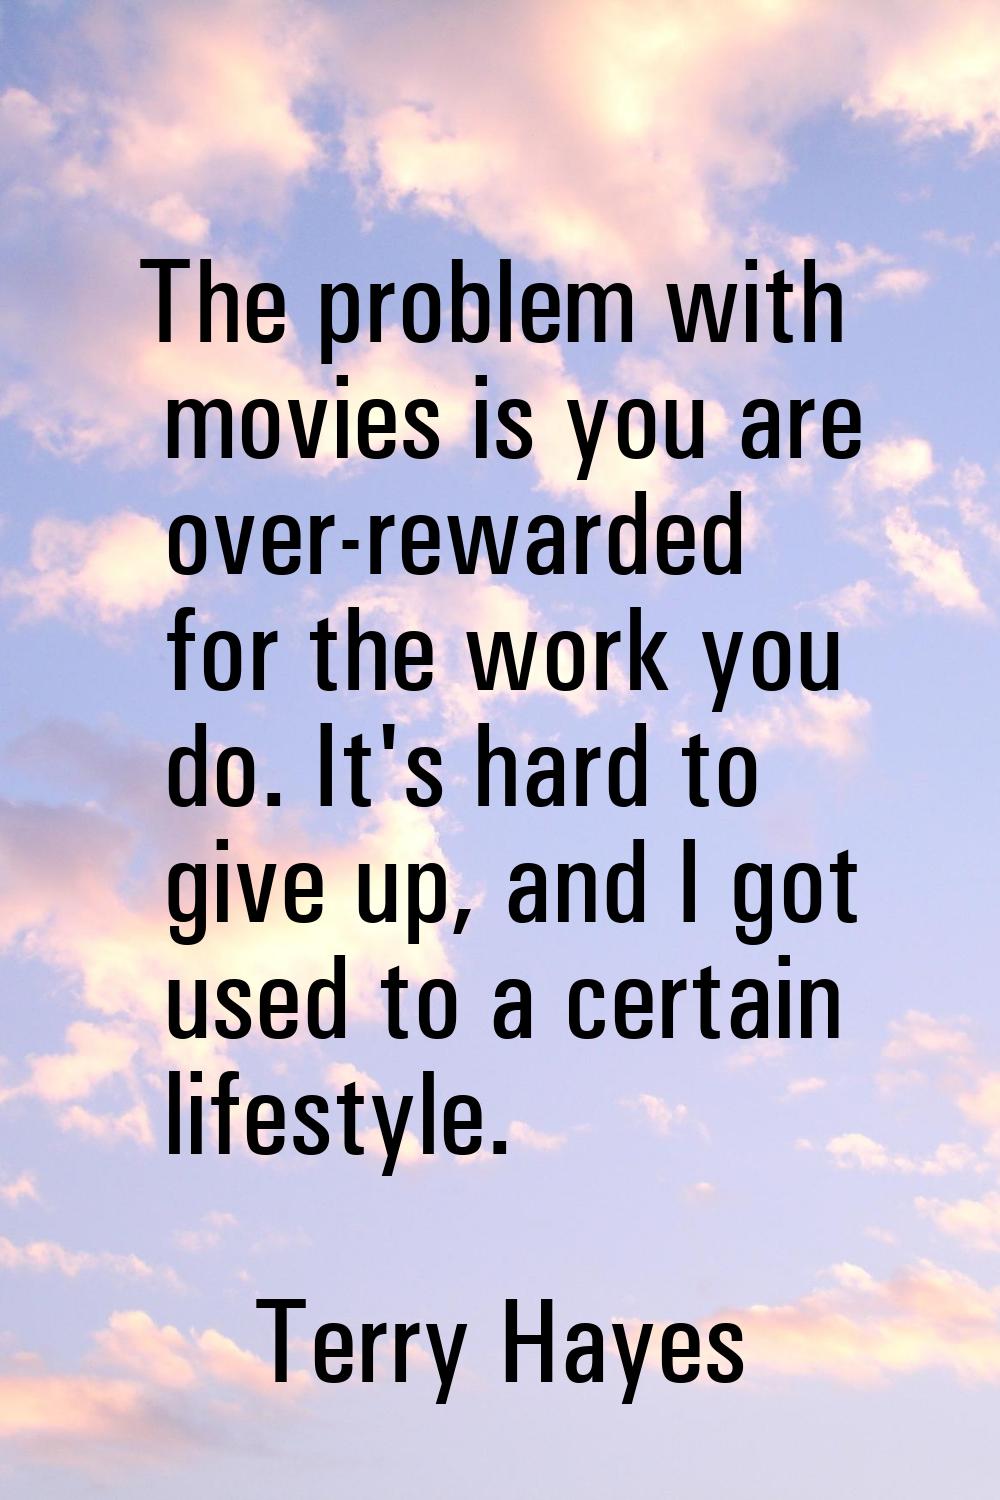 The problem with movies is you are over-rewarded for the work you do. It's hard to give up, and I g